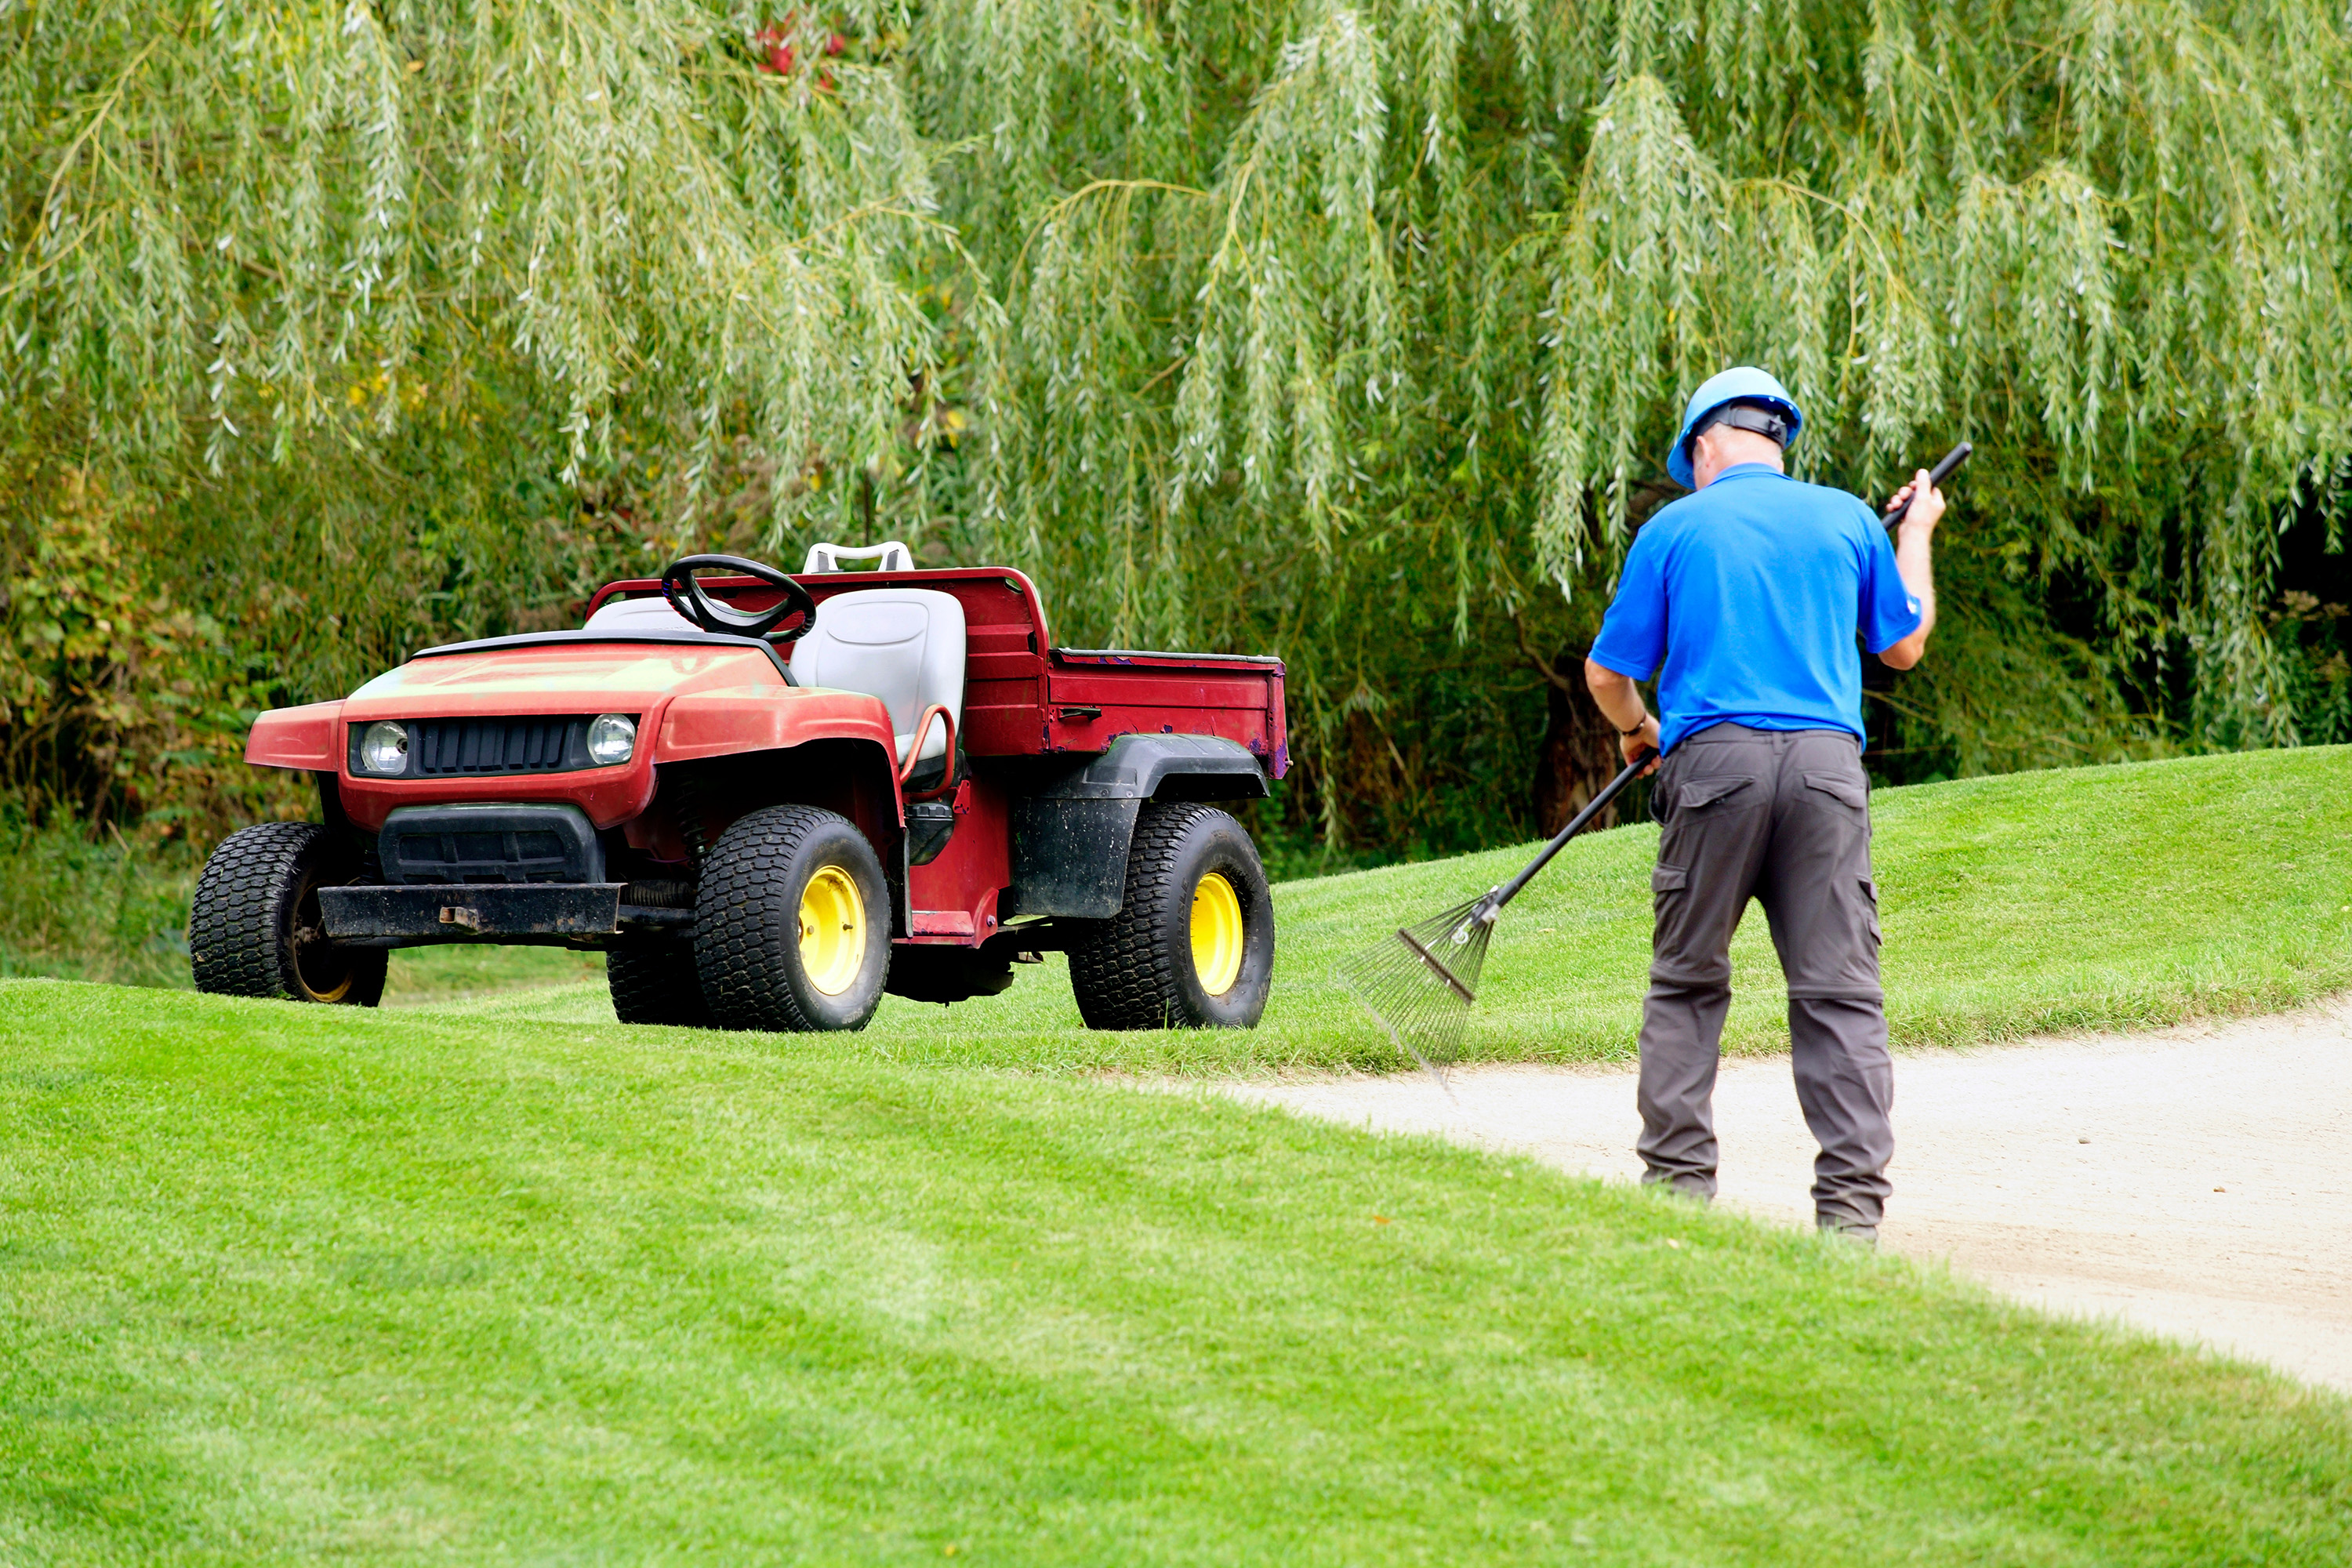 Turf Topdressing – Why, When and How To Do It